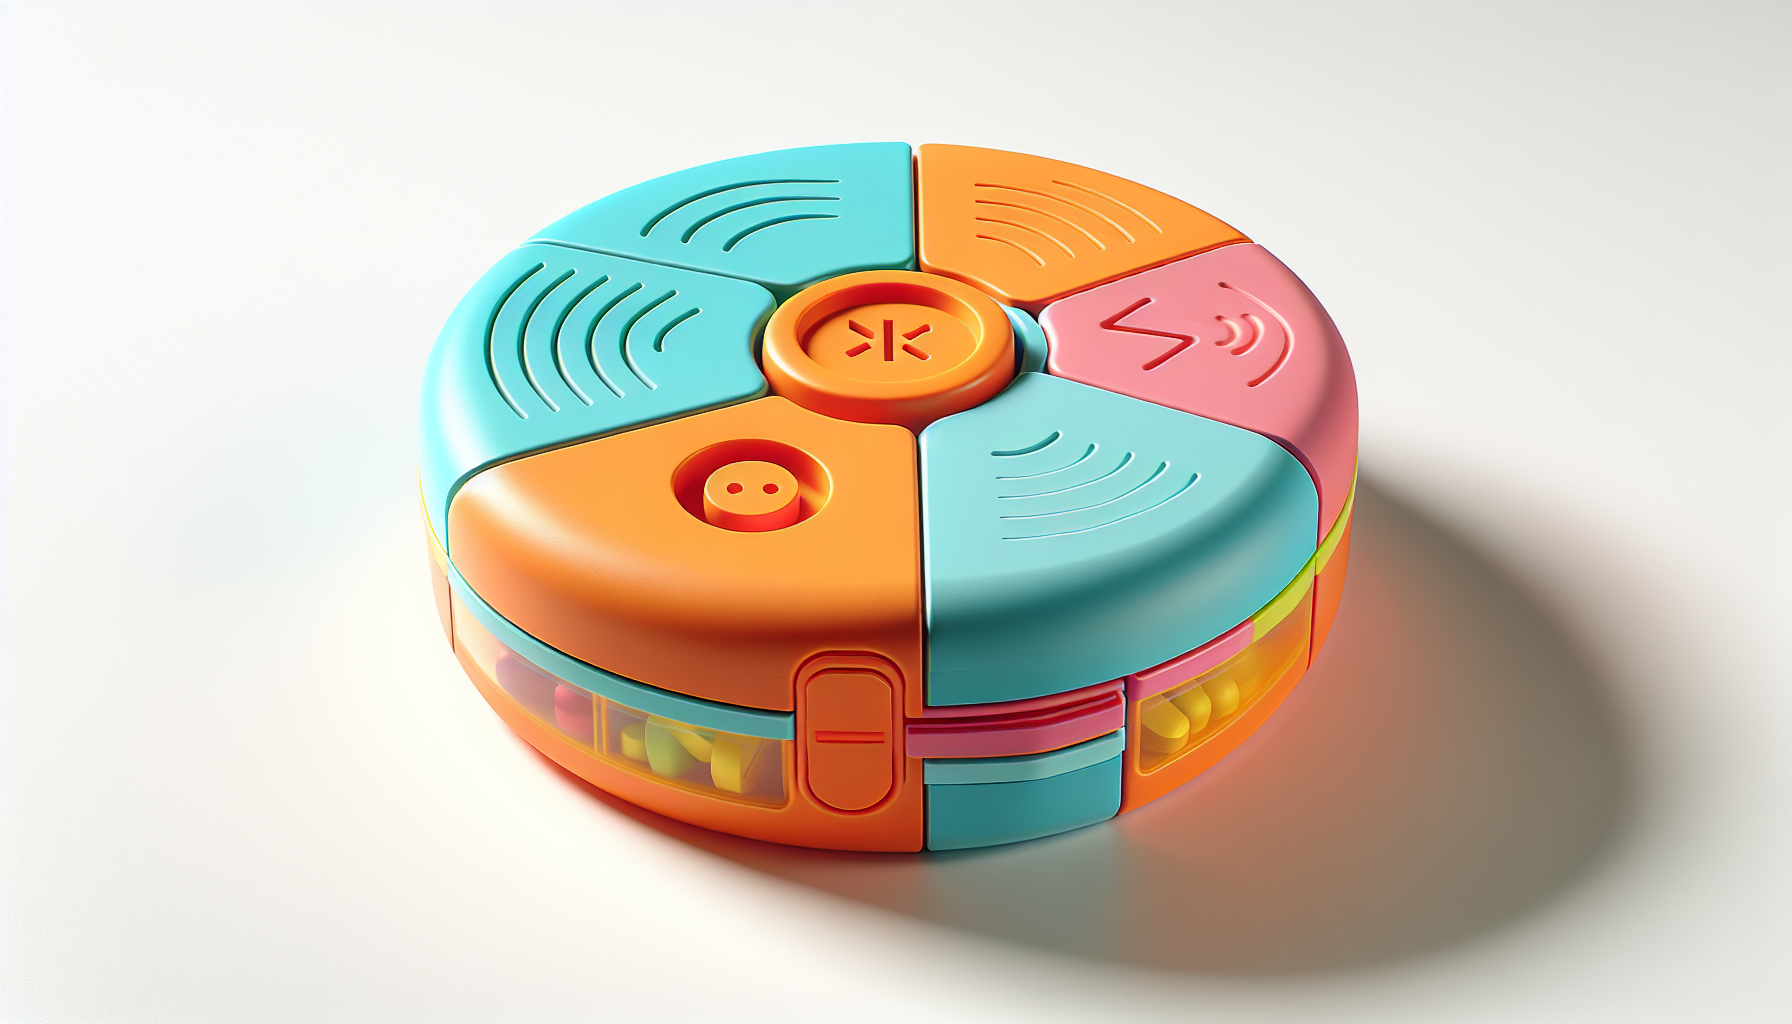 Childproof pill box with easy-open lid